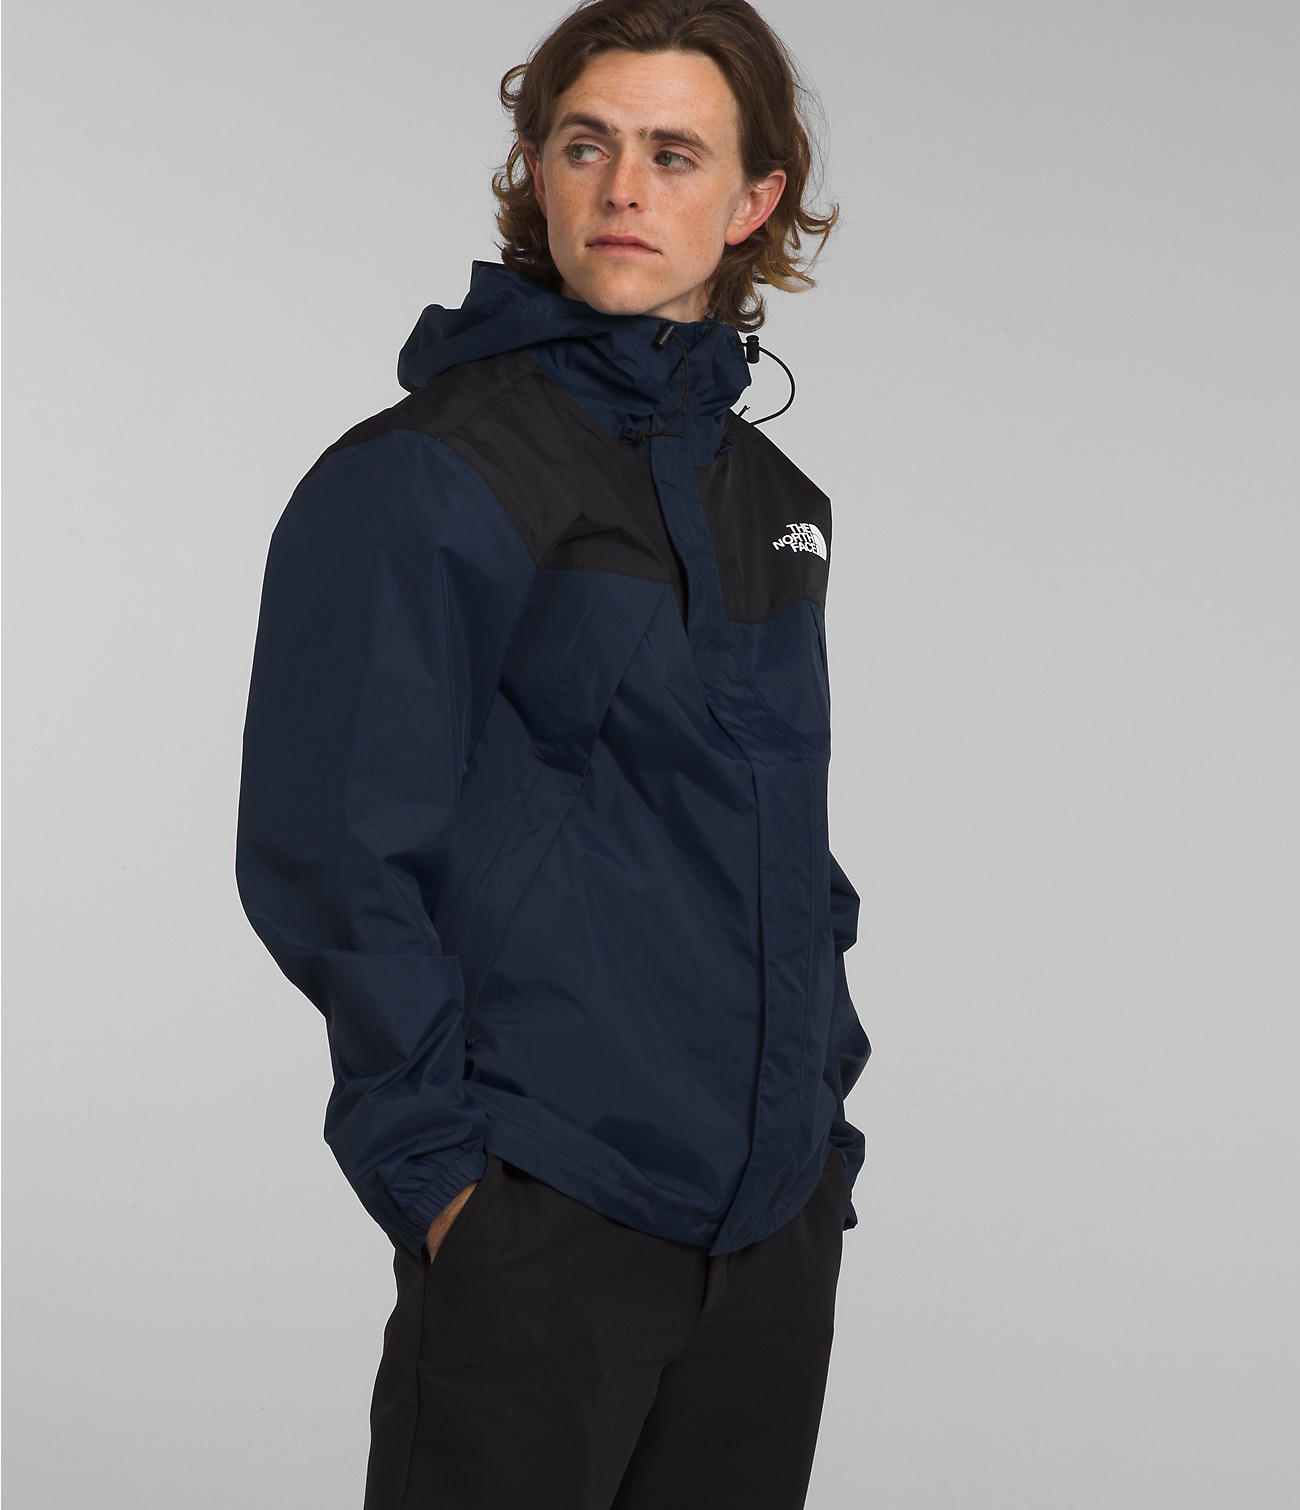 Unlock Wilderness' choice in the Rei Vs North Face comparison, the Antora Jacket by The North Face